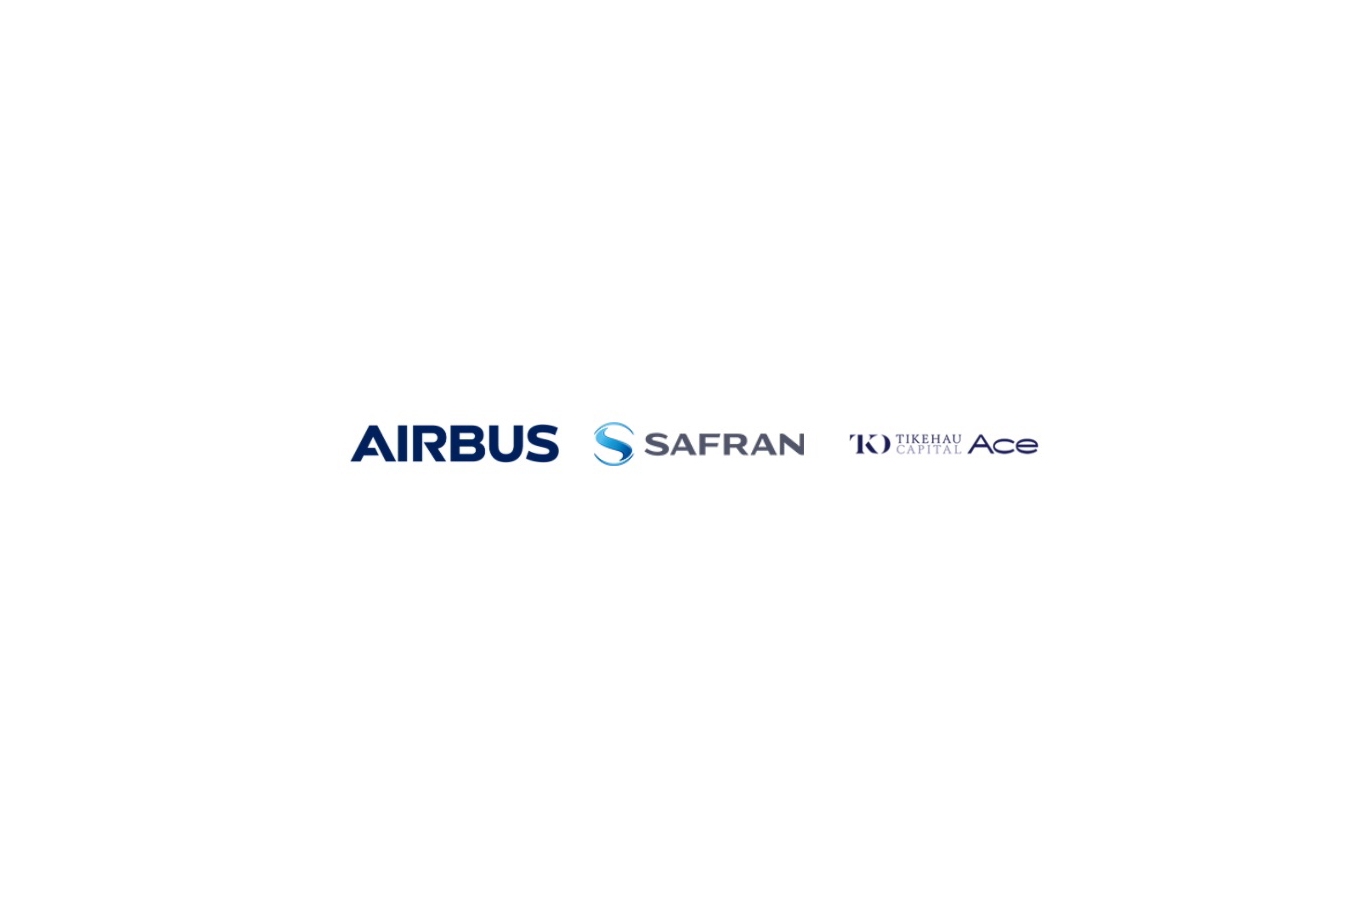 Airbus, Safran and Tikehau Ace Capital have signed a MOU to acquire Aubert & Duval Click to enlarge.